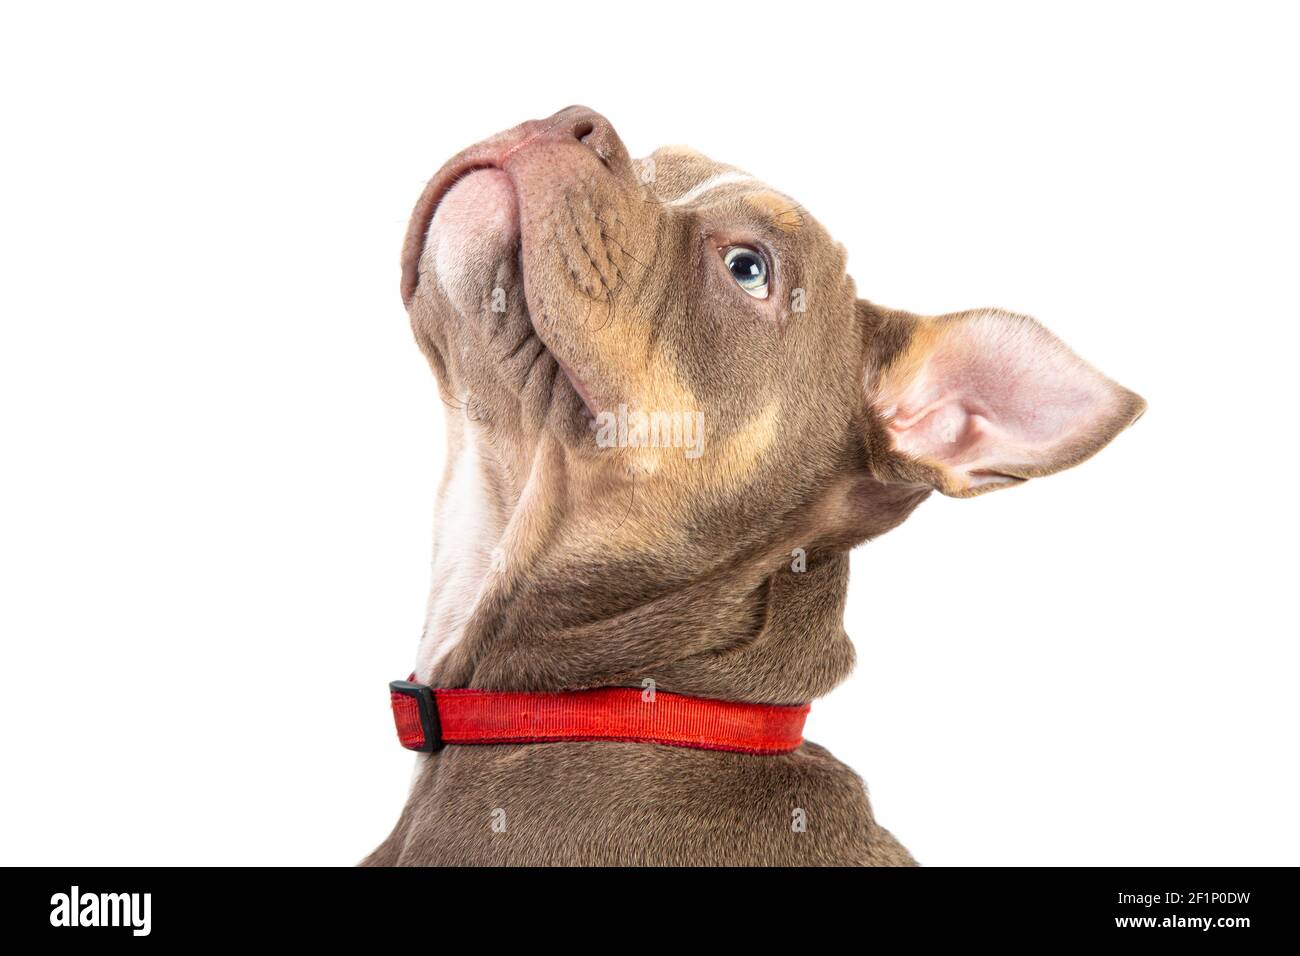 French bull dog looking up on a white background Stock Photo